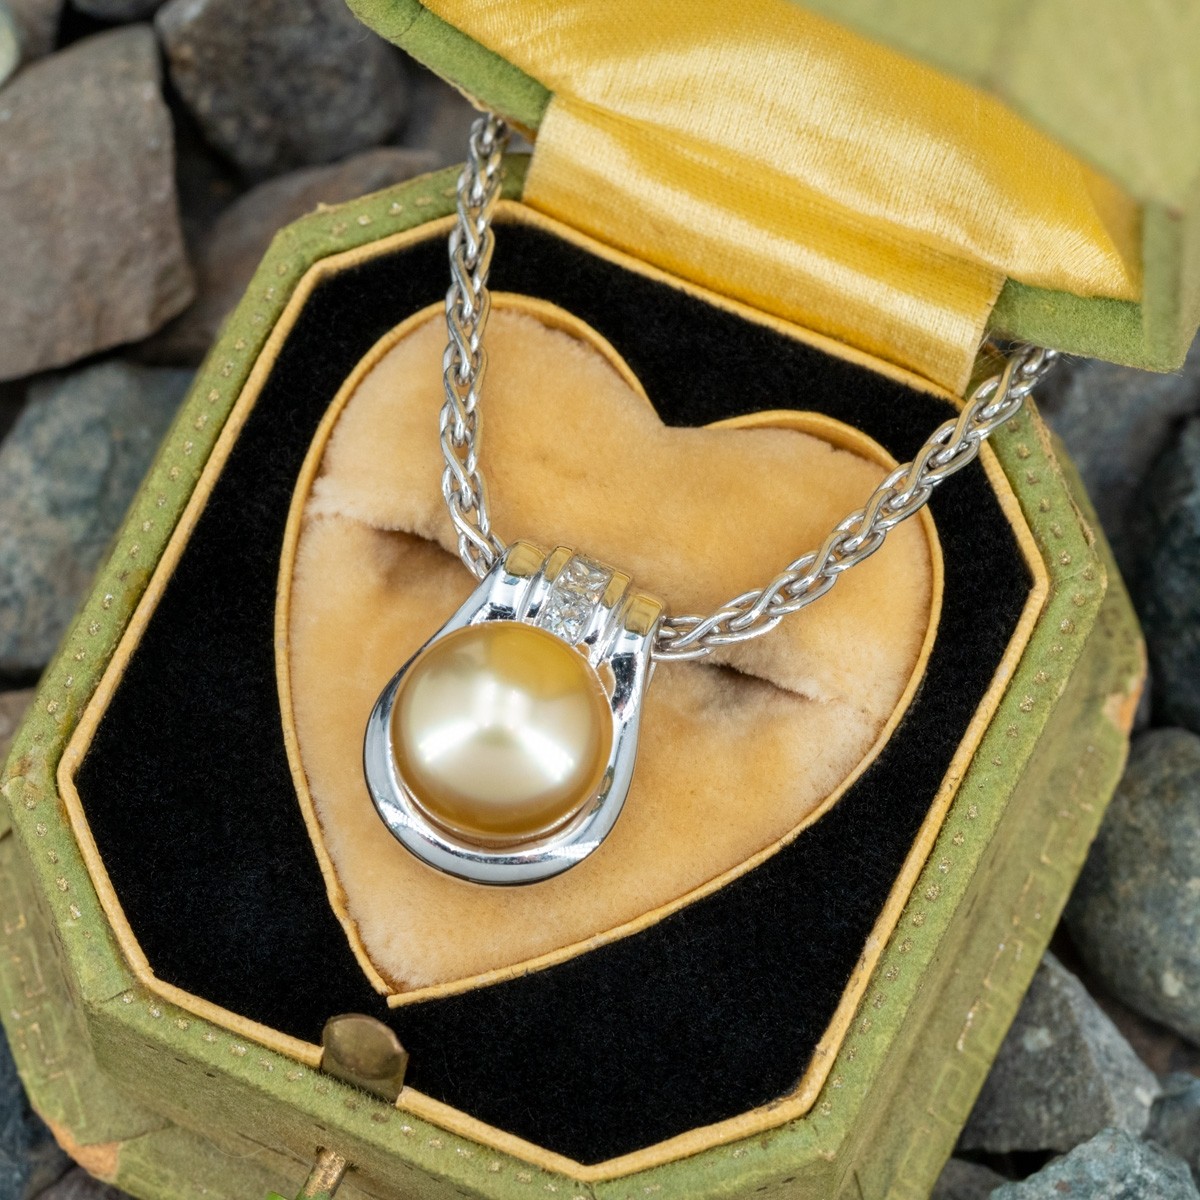 Tiffany Signature™ Pearls pendant in 18k white gold with a pearl and a  diamond. | Tiffany & Co.